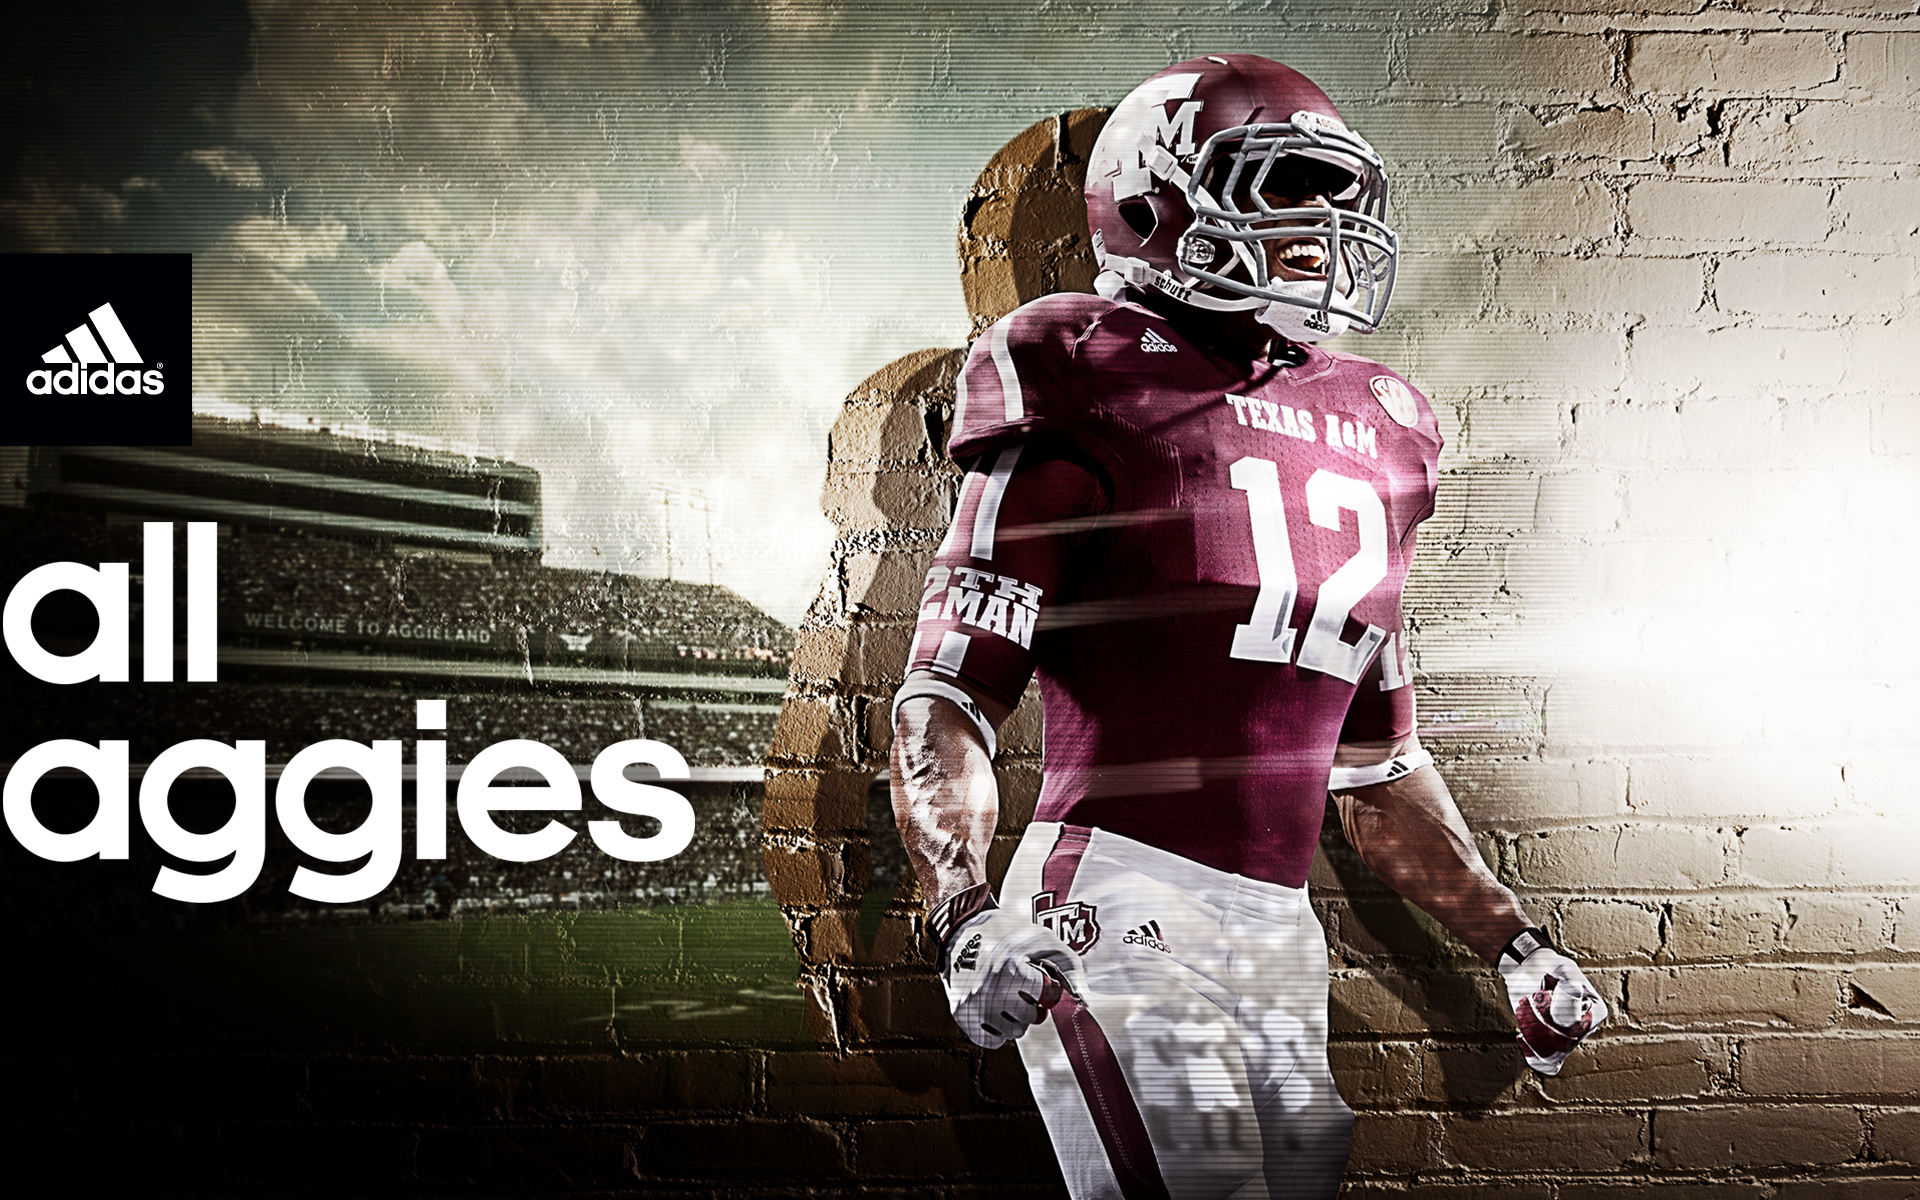 1000+ images about Aggies on Pinterest | Football, Infinity love